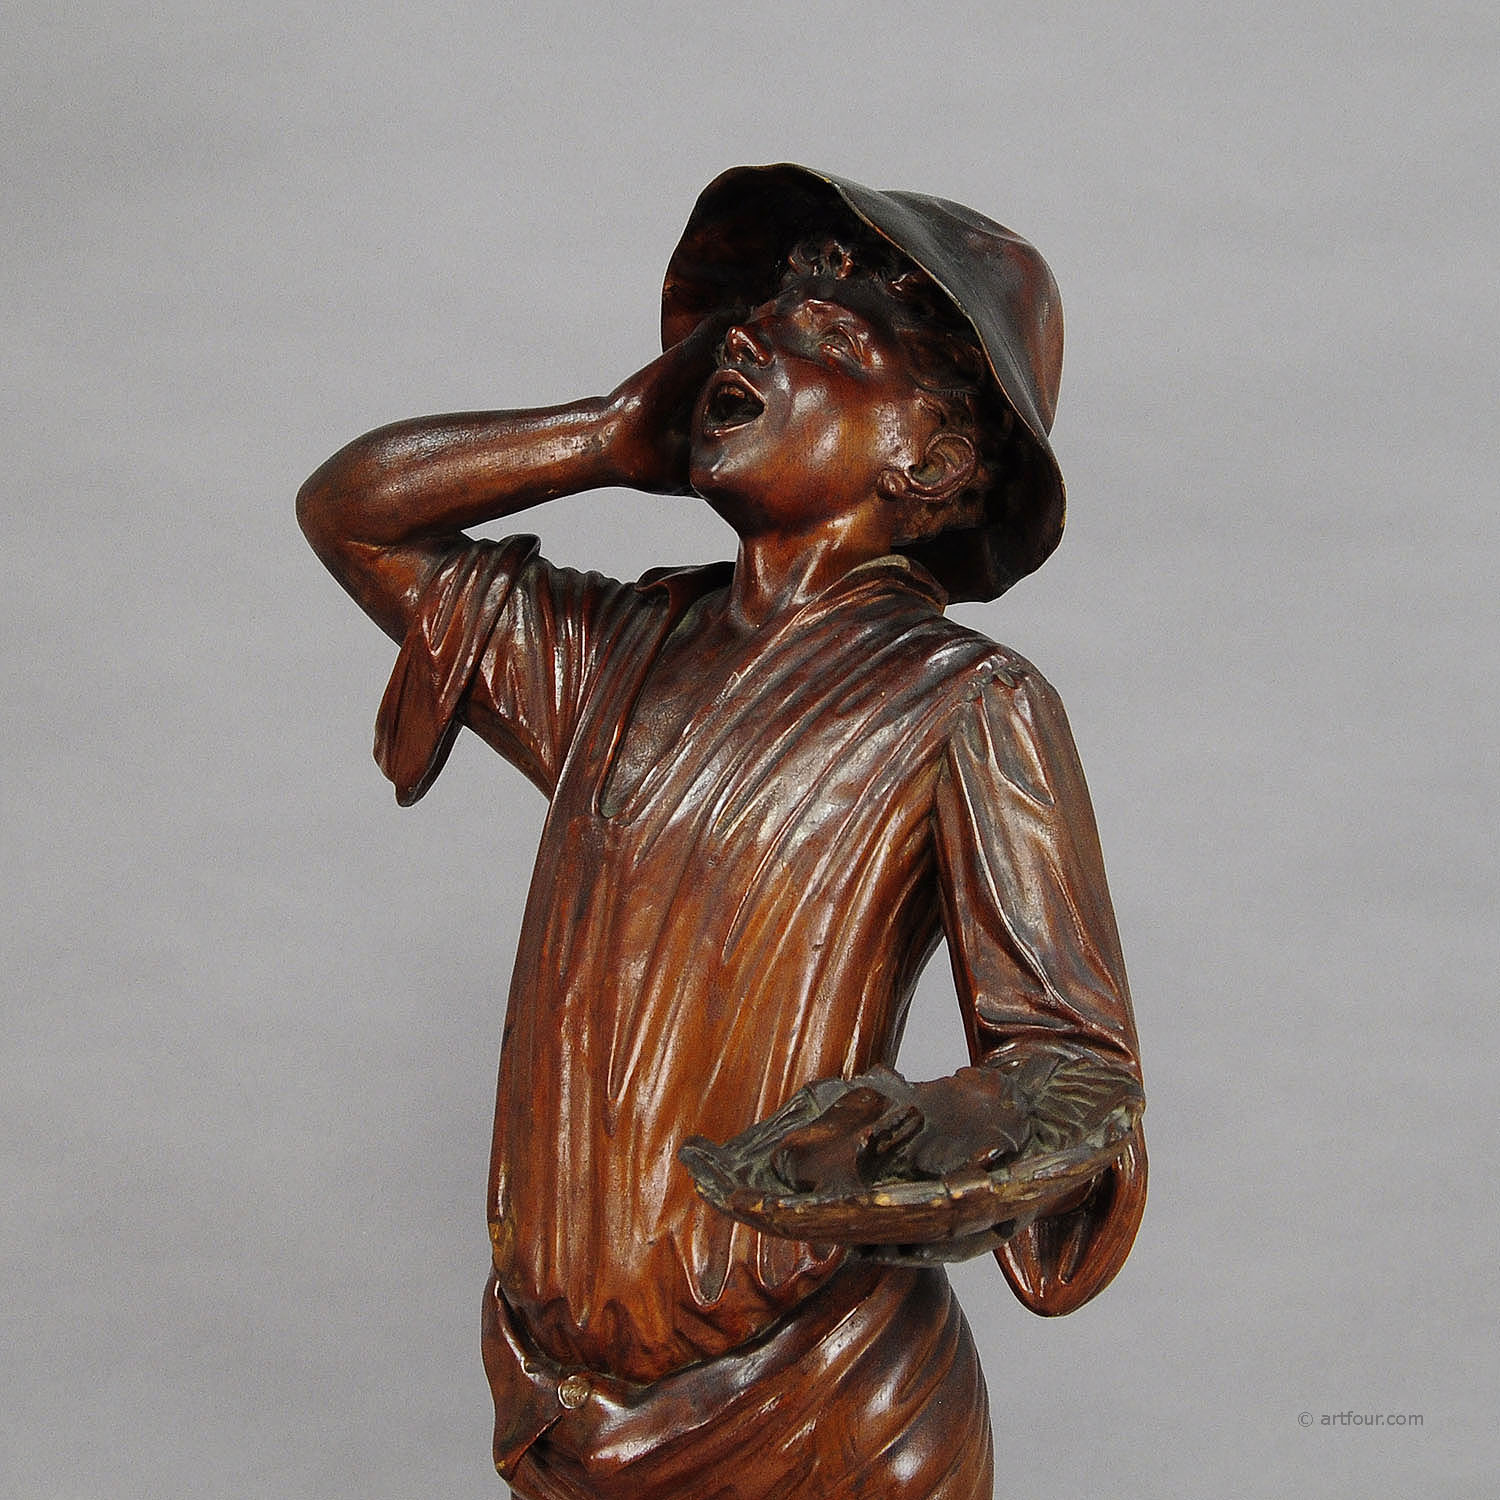 Antique Wooden Carved Statue of a Young Fisherman